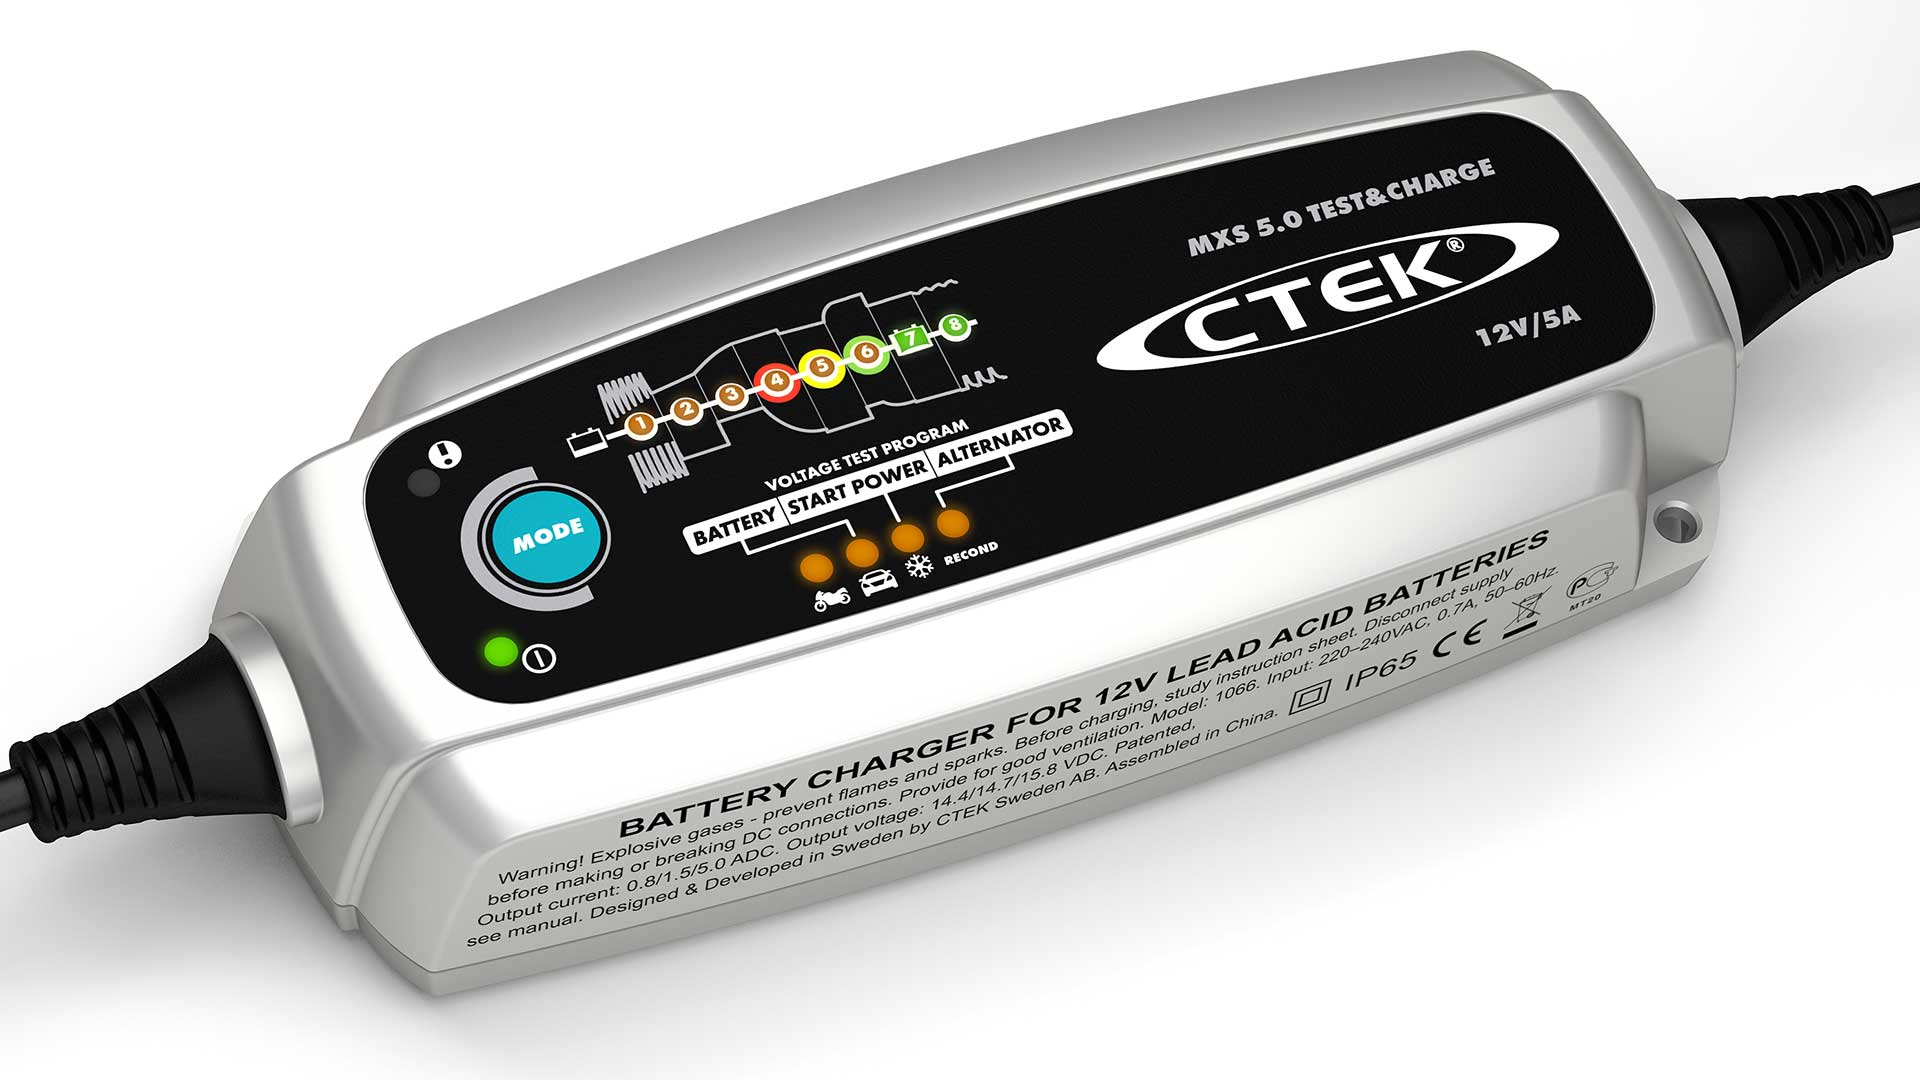 Caricabatterie MXS5.0  TEST&CHARGE  CTEK 5A